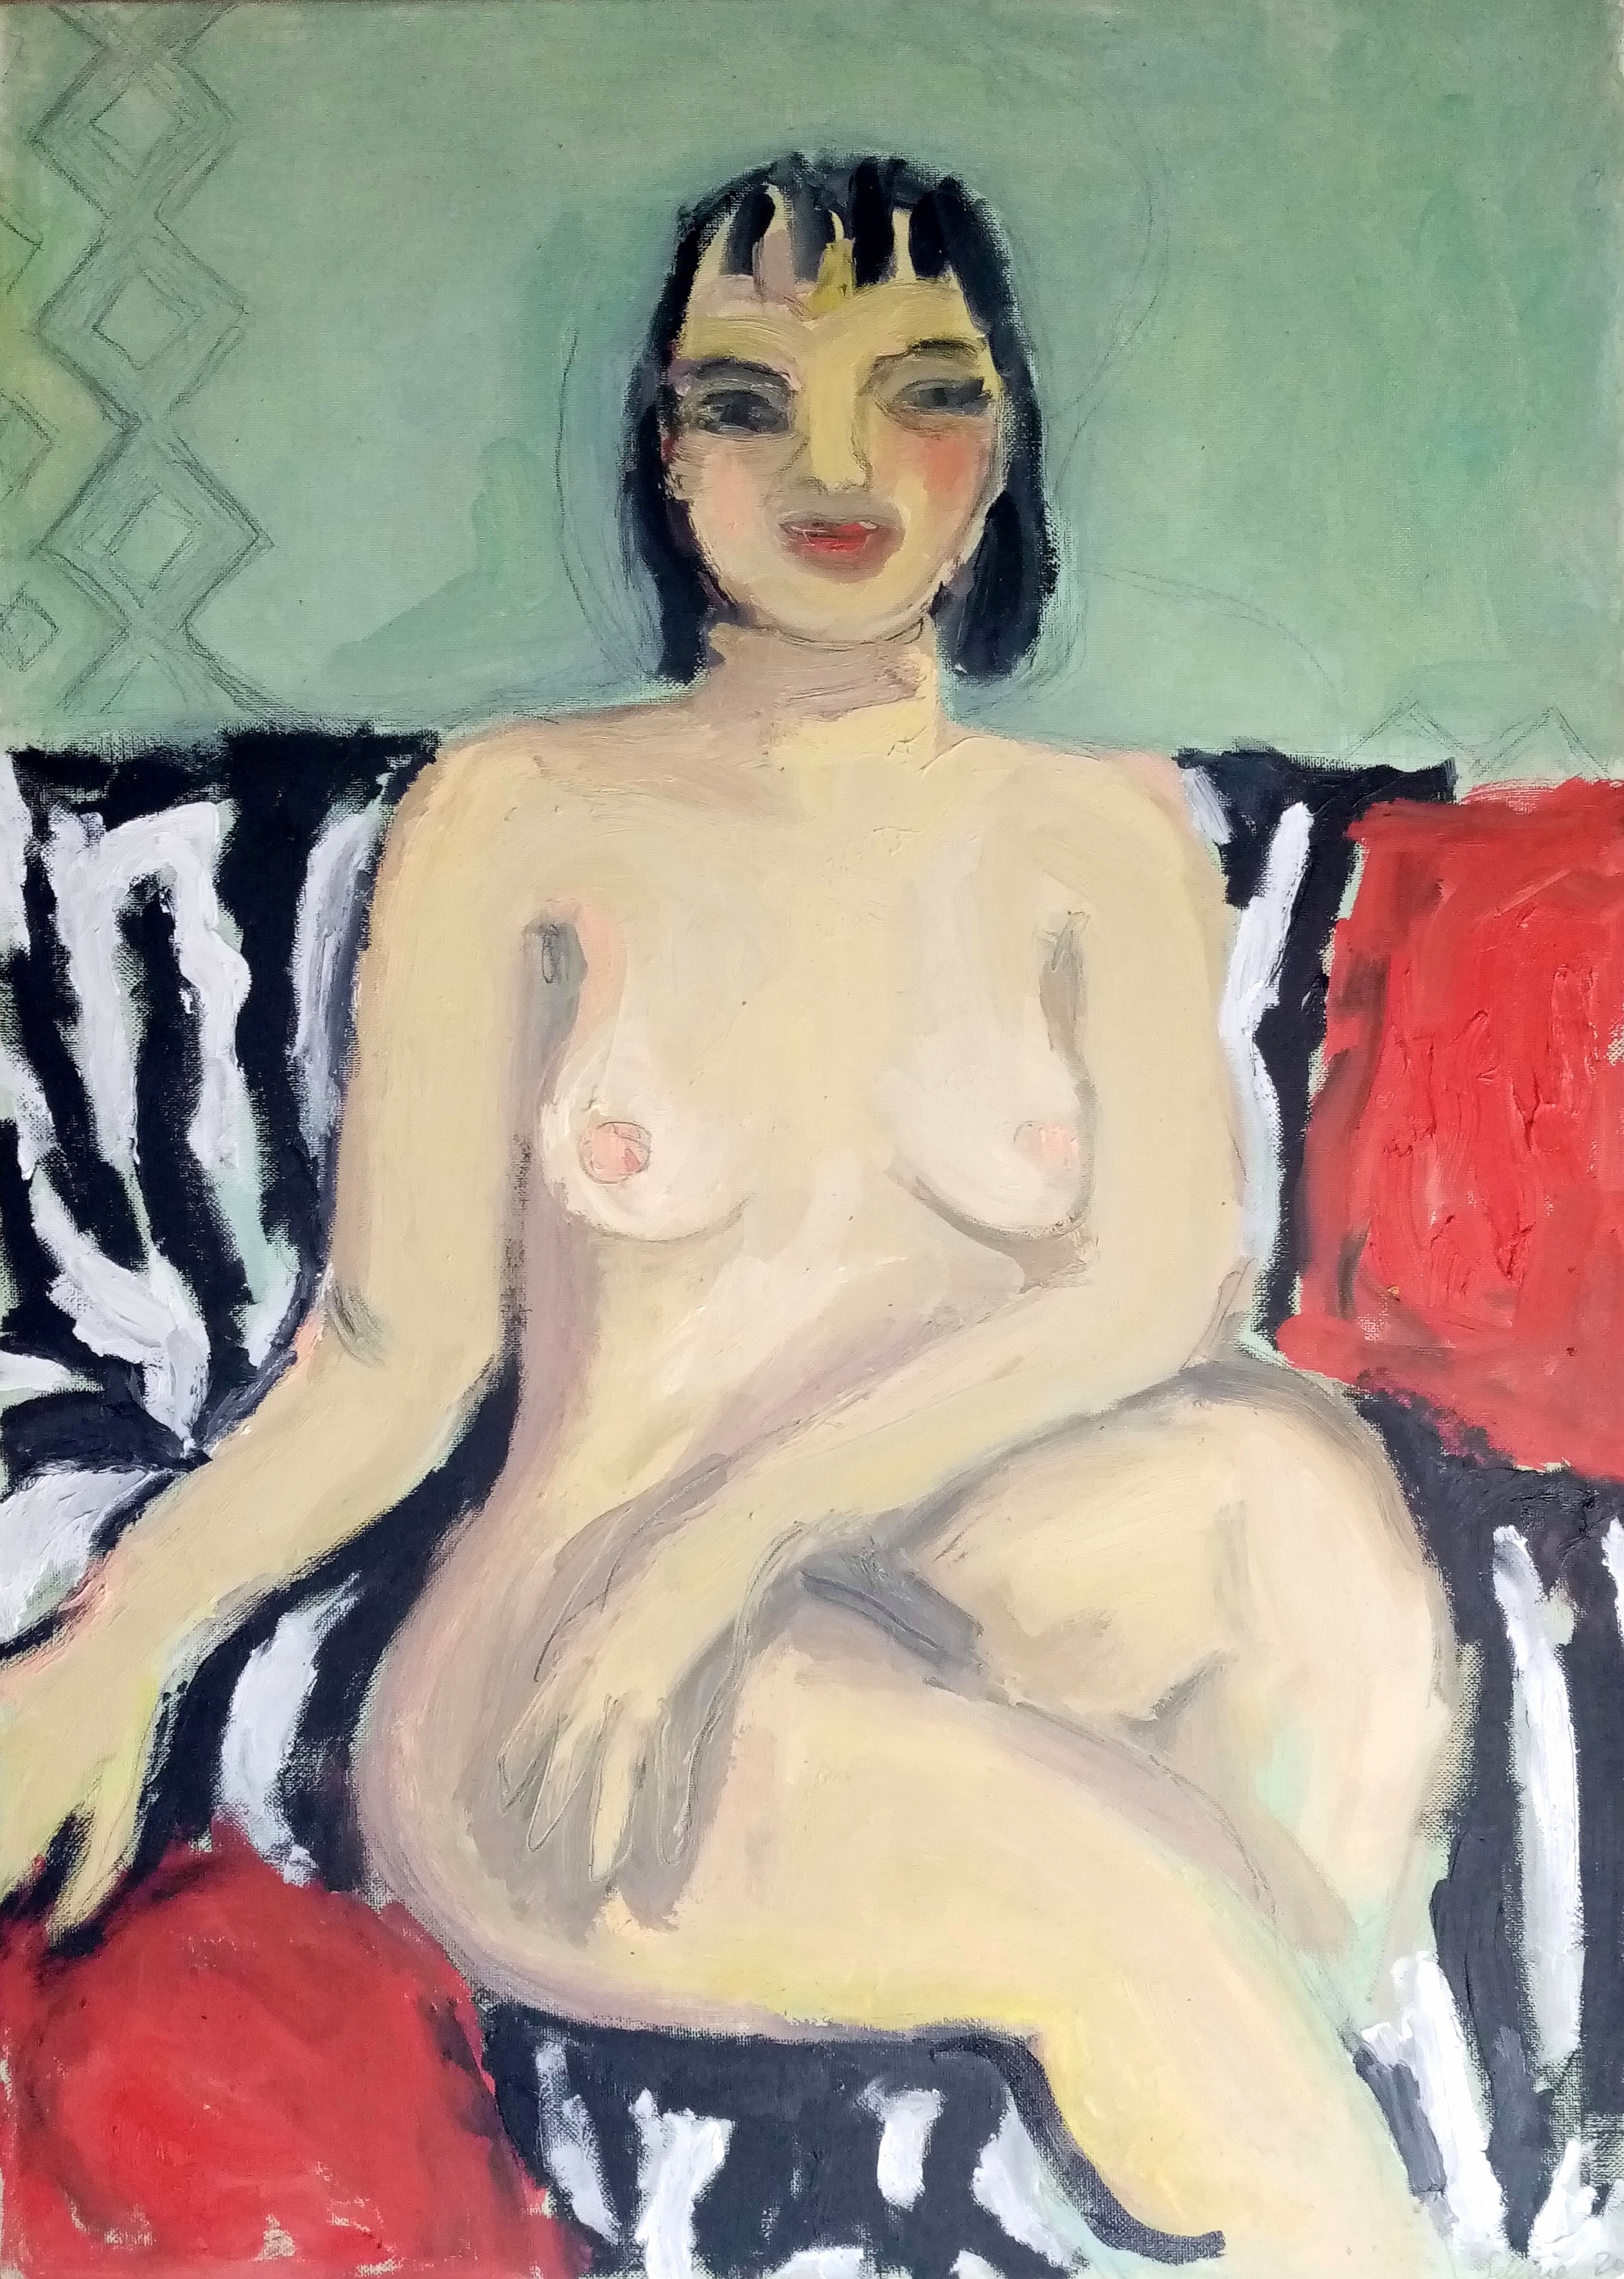 Selenia Bosso; Nude On Zebra Sofa, 2020, Original Painting Oil, 50 x 70 cm. Artwork description: 241 Naked black- haired woman sitting on a black and white striped sofa and red cushions, with aqua green wall background...